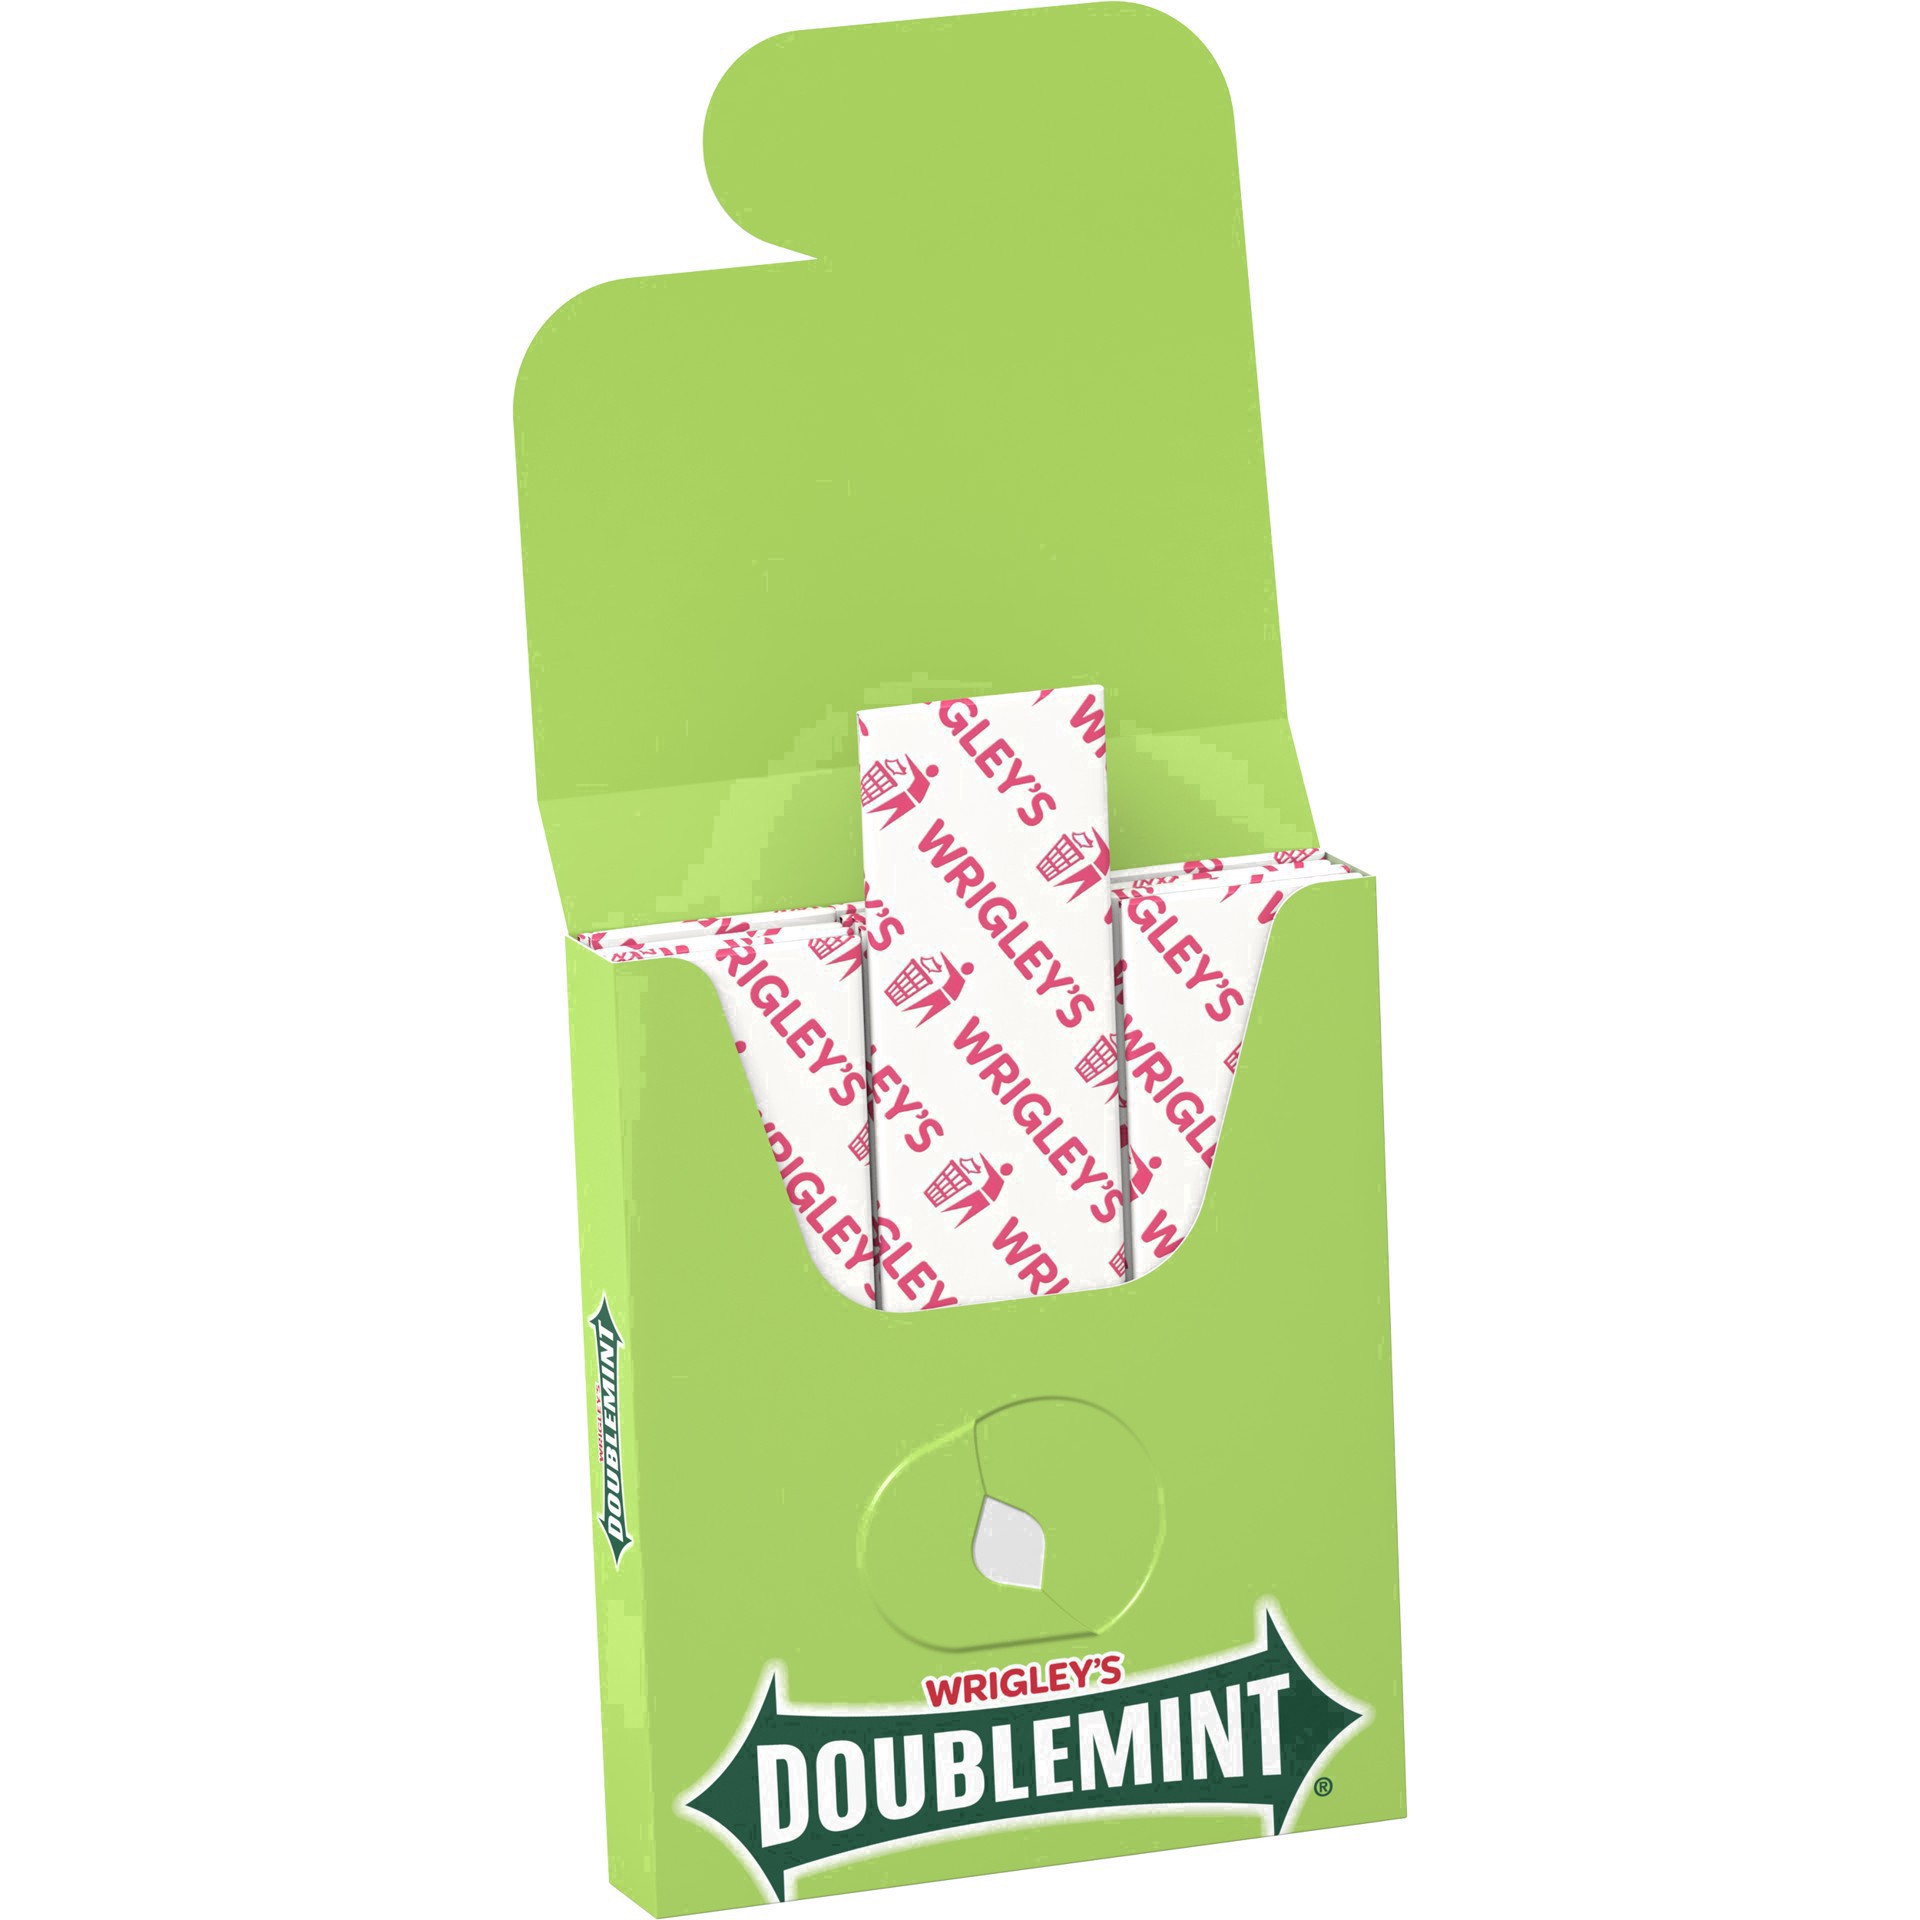 slide 105 of 134, Doublemint WRIGLEY'S DOUBLEMINT Bulk Chewing Gum, Value Pack, 15 ct (3 Pack), 45 ct